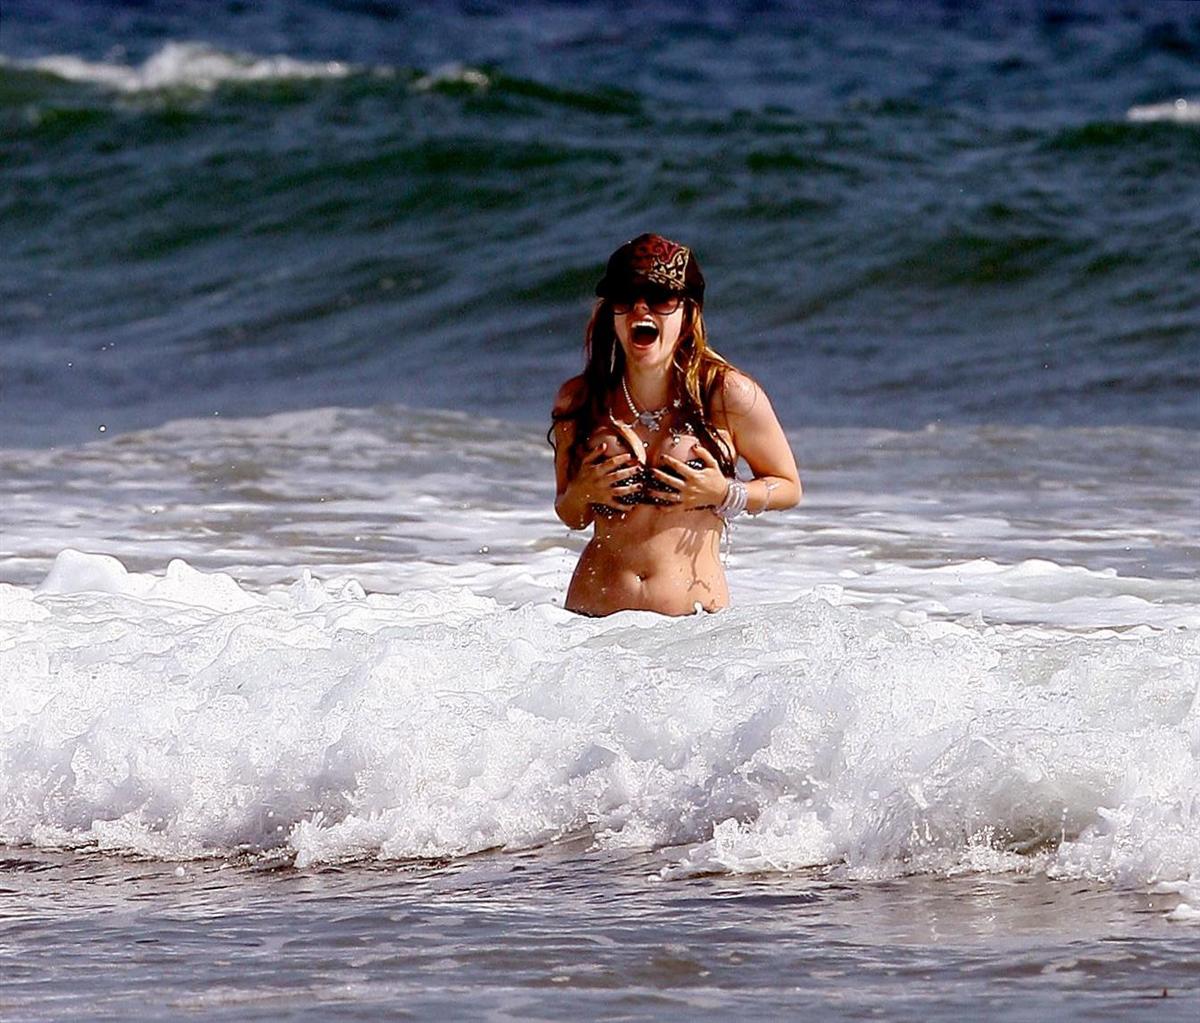 Avril Lavigne at the beach in cold water crushing her boobs